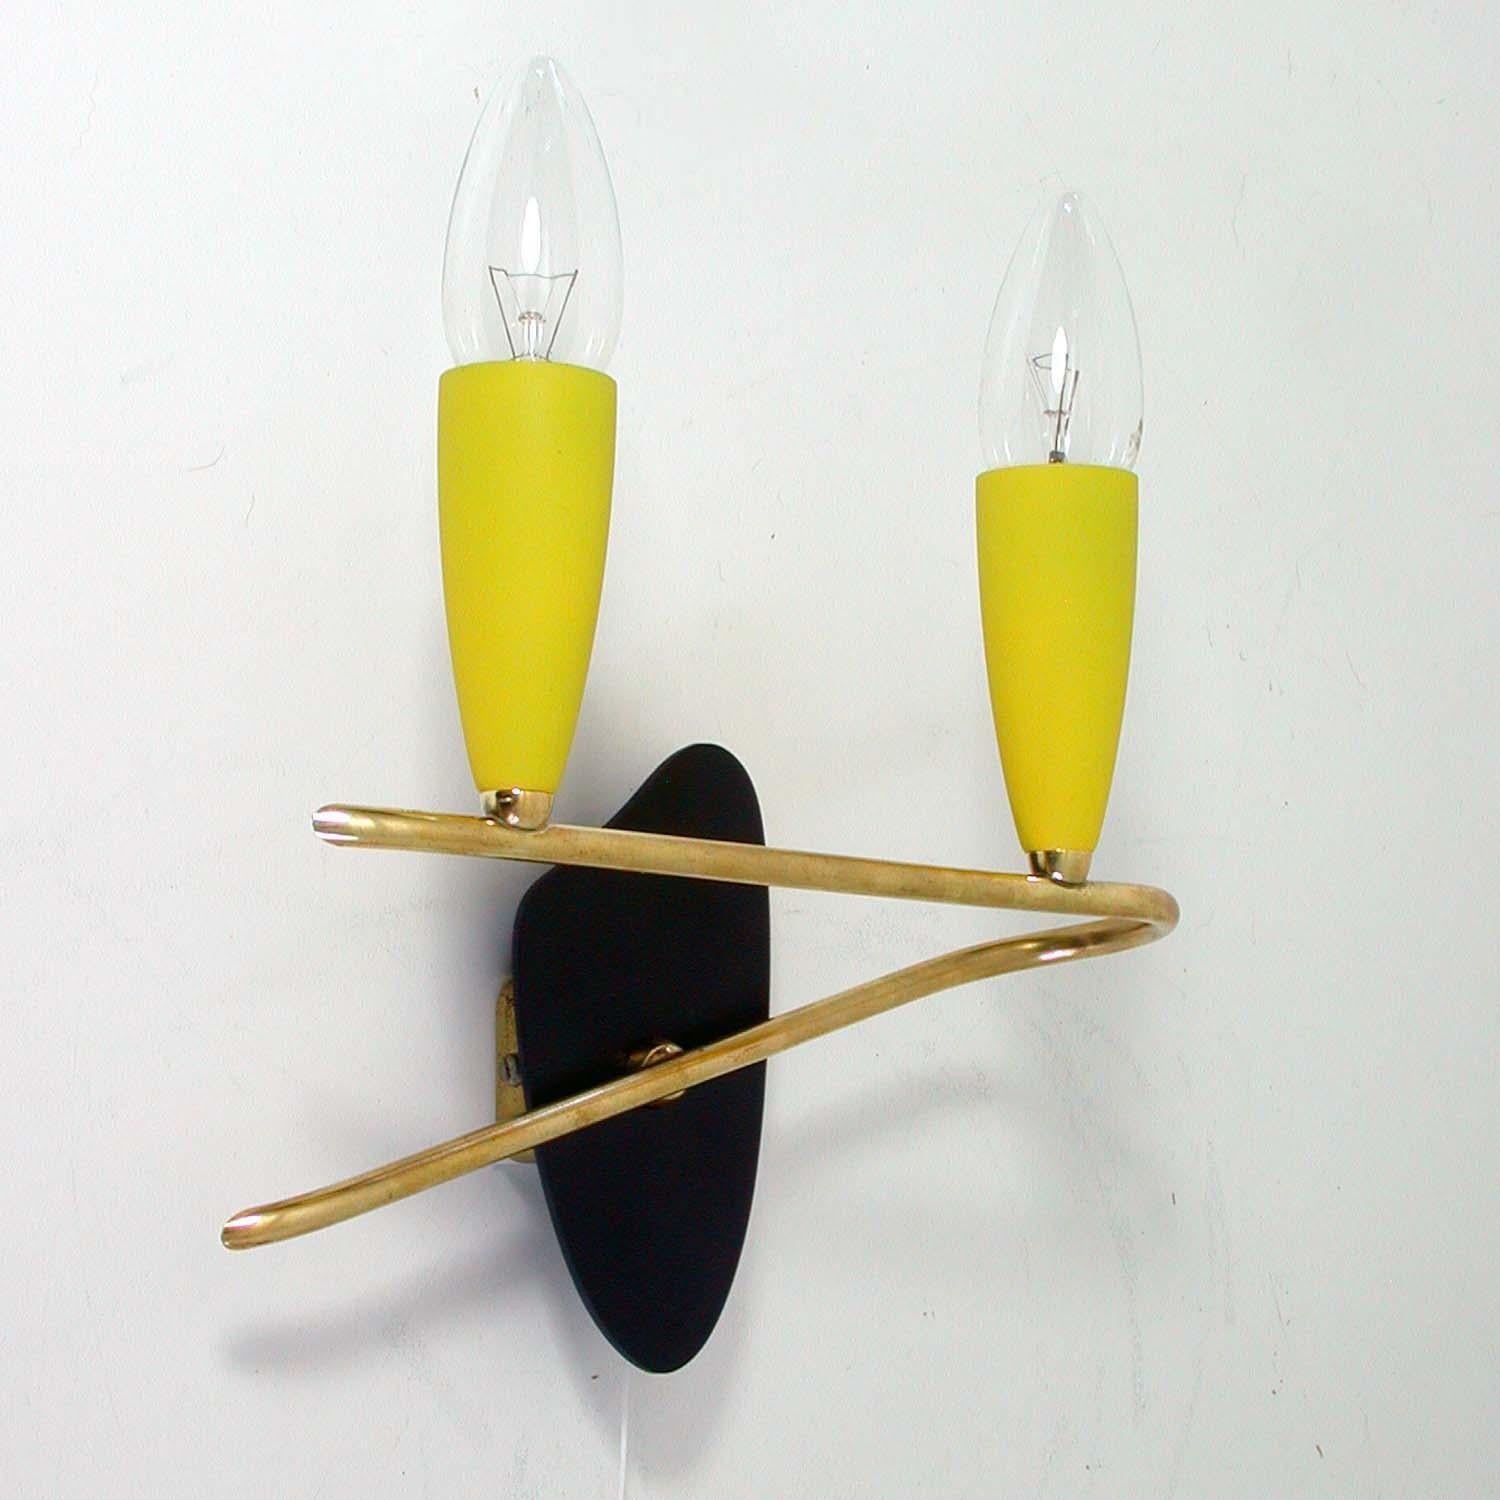 This cute little wall light was designed and manufactured in Germany in the 1950s. It is made of brass and has got 2 yellow lacquered E14 bulb holders. The backplate is black lacquered plastic in the shape of a painter palette. The switch for the